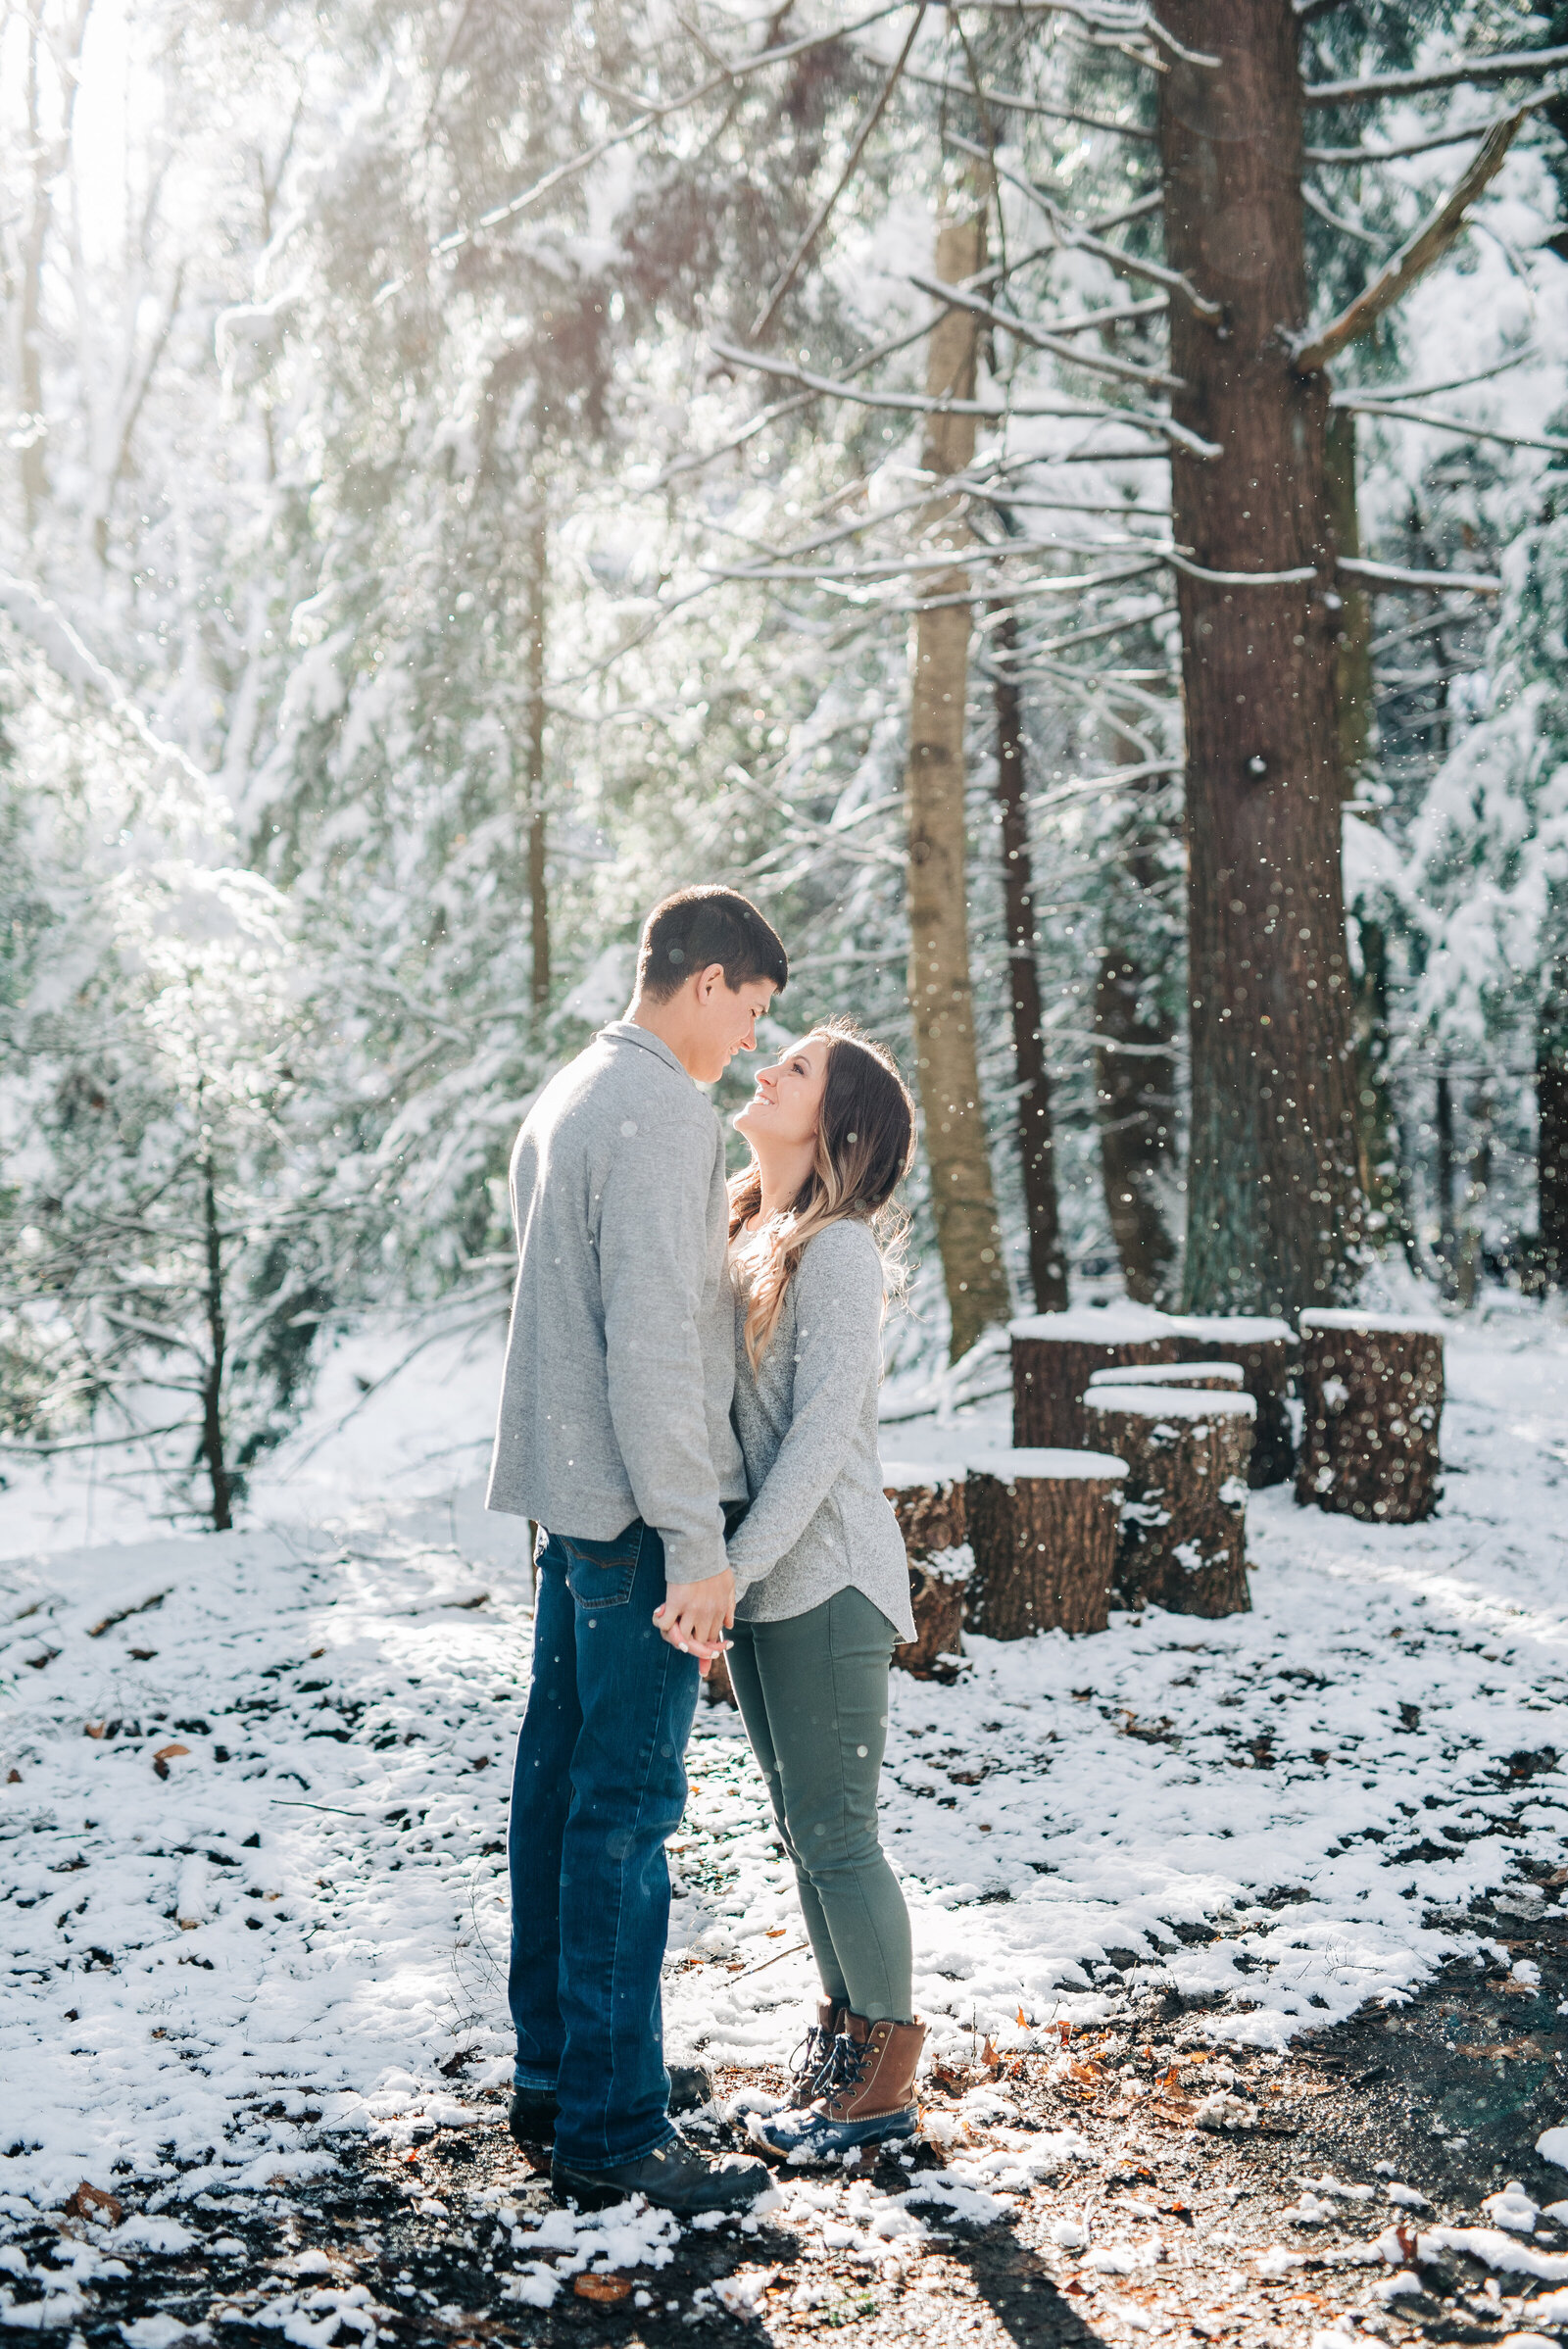 Dreamy Snowy Sunlight winter engagement session